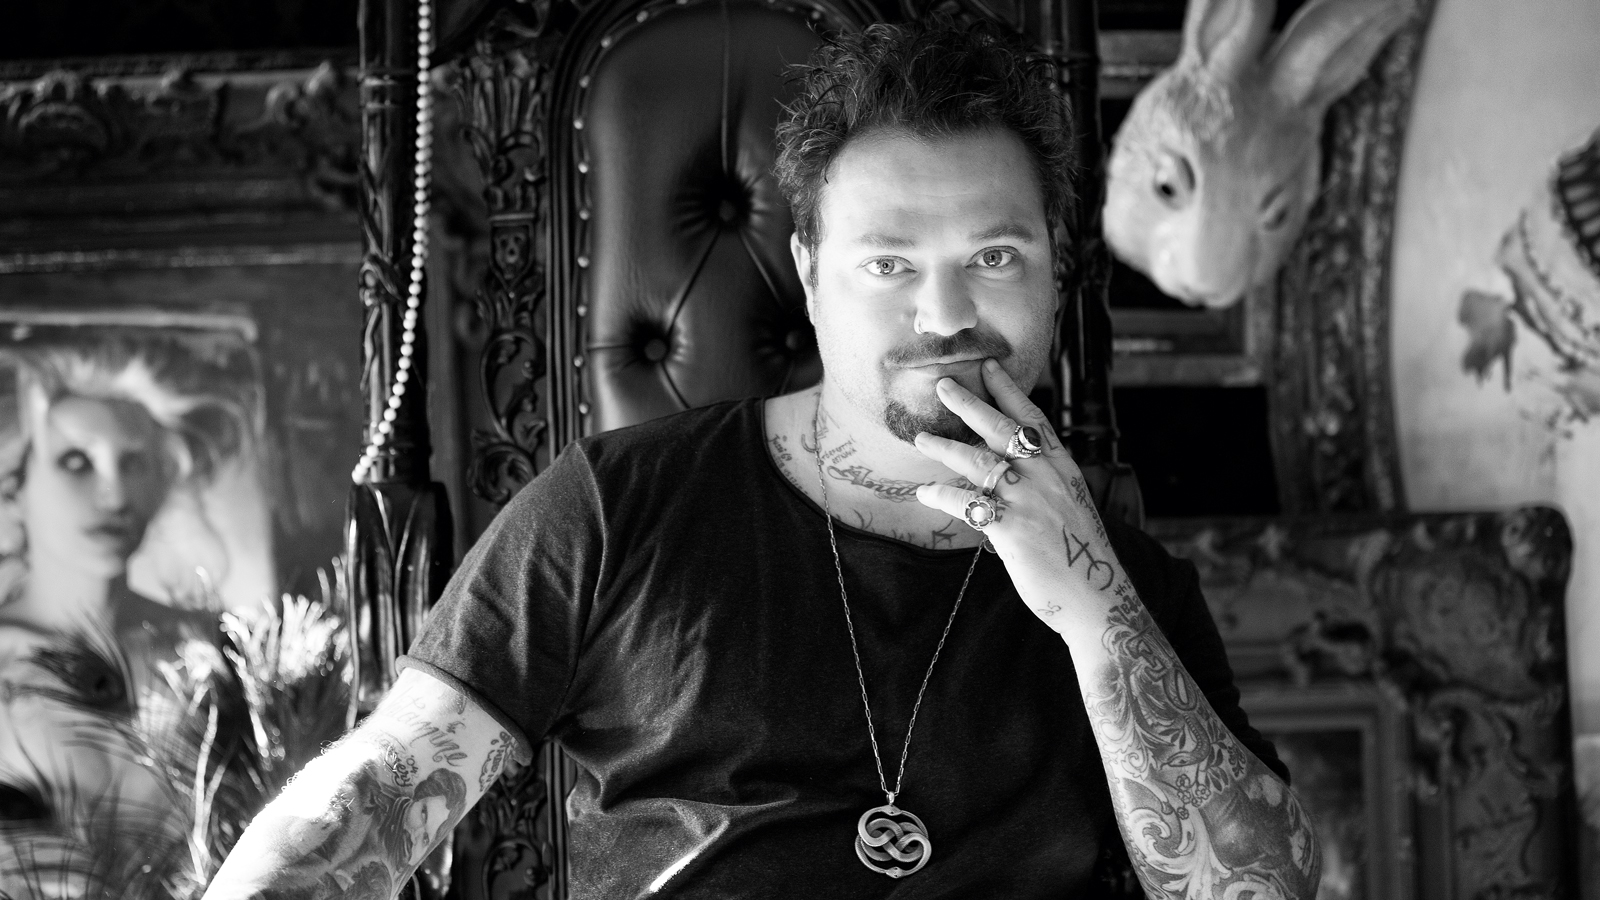 Bam Margera on Naked Stalkers, Bad Tattoos, Finding Sobriety After Jackass Revolver hq nude image